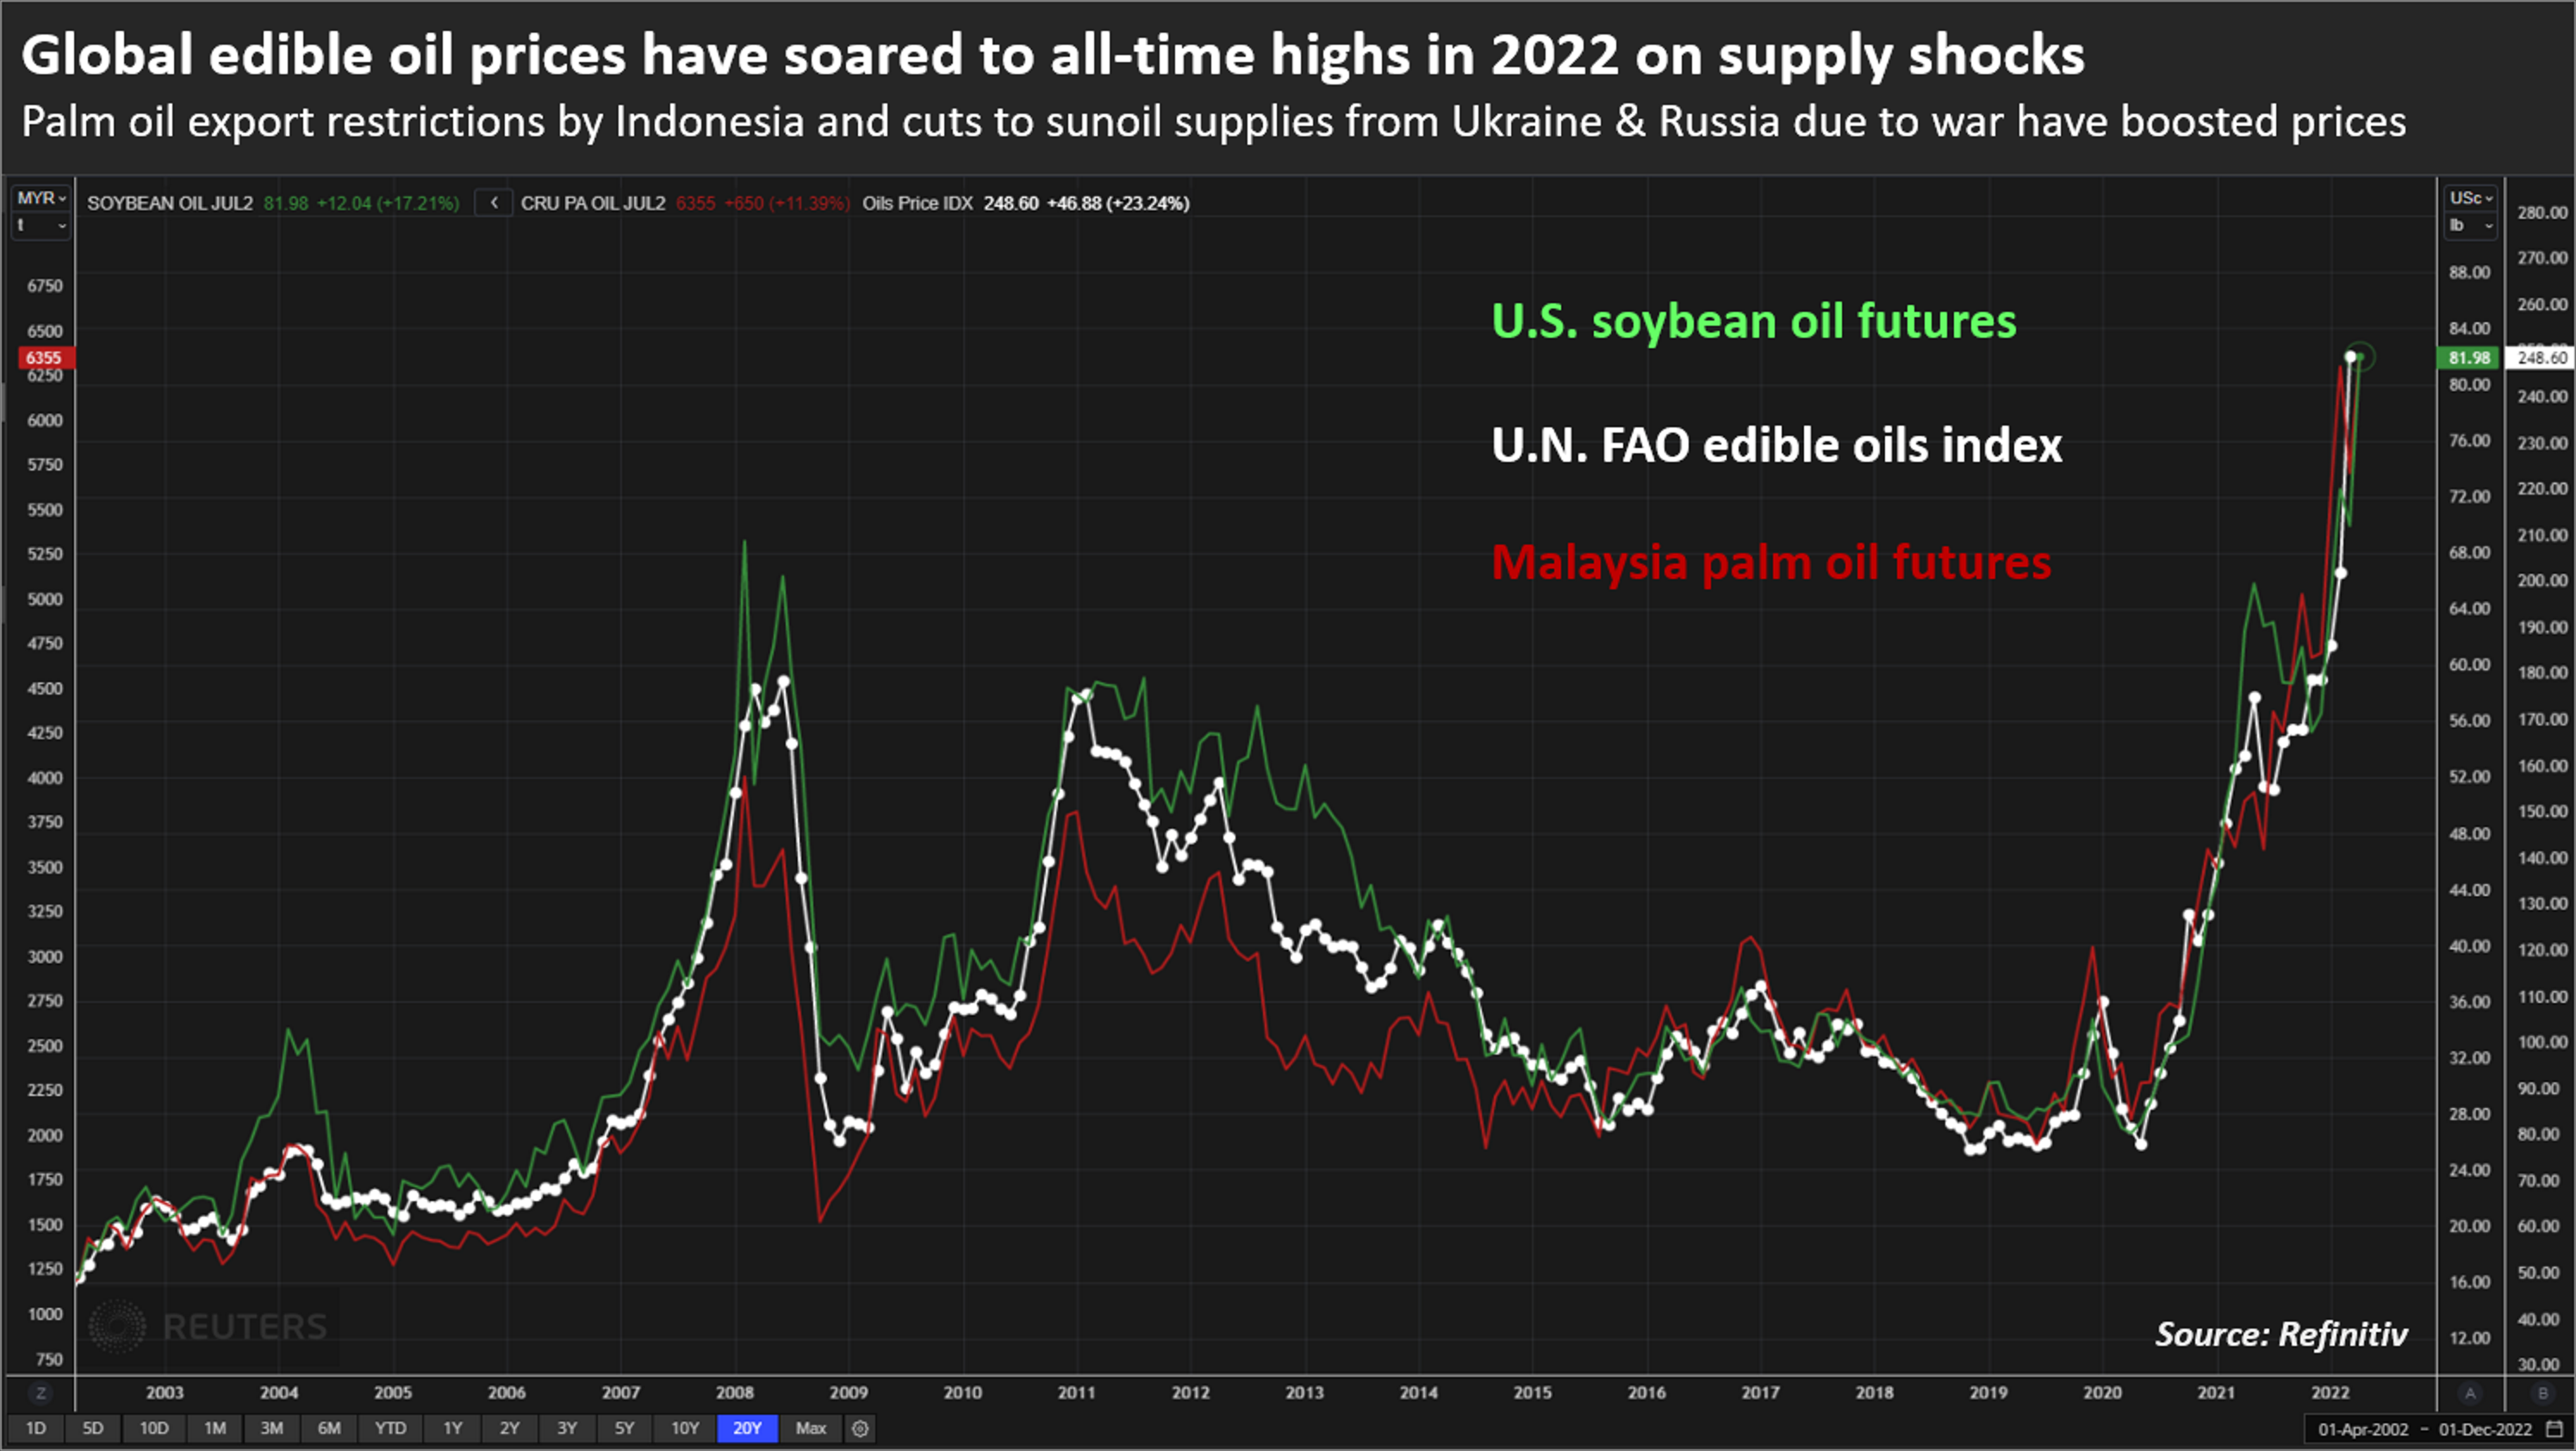 U.S. soybean oil futures, U.N. FAO edible oils index, and Malaysia palm oil futures, 2002-2022. Global edible oil prices have soared to all-time highs in 2022 on supply shocks. Graphic: Refinitiv / Reuters